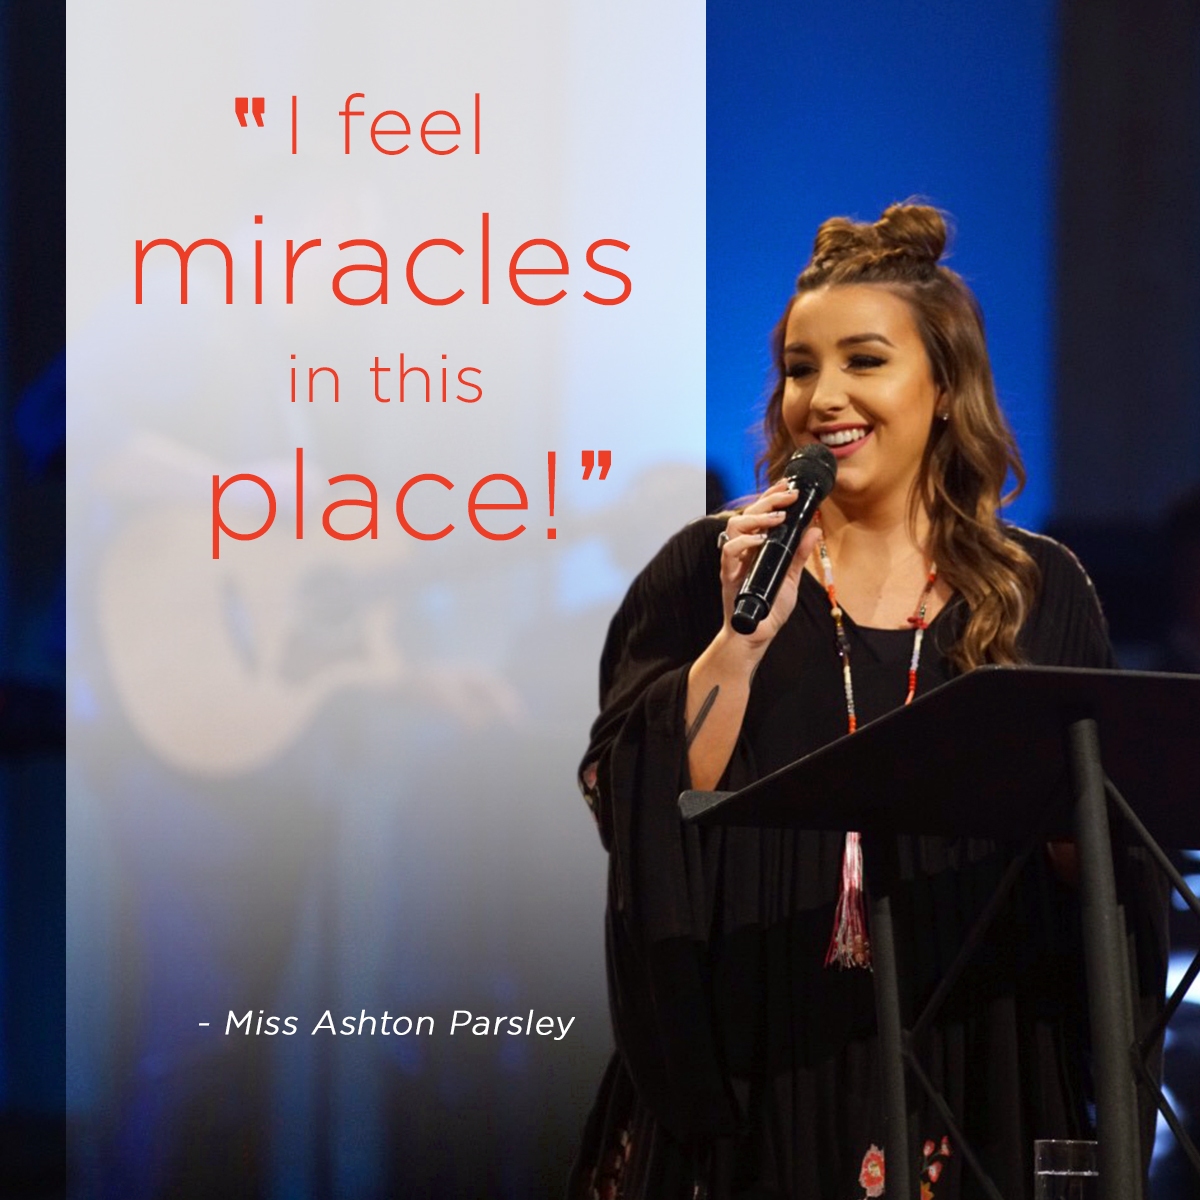 “I feel miracles in this place” – Miss Ashton Parsley